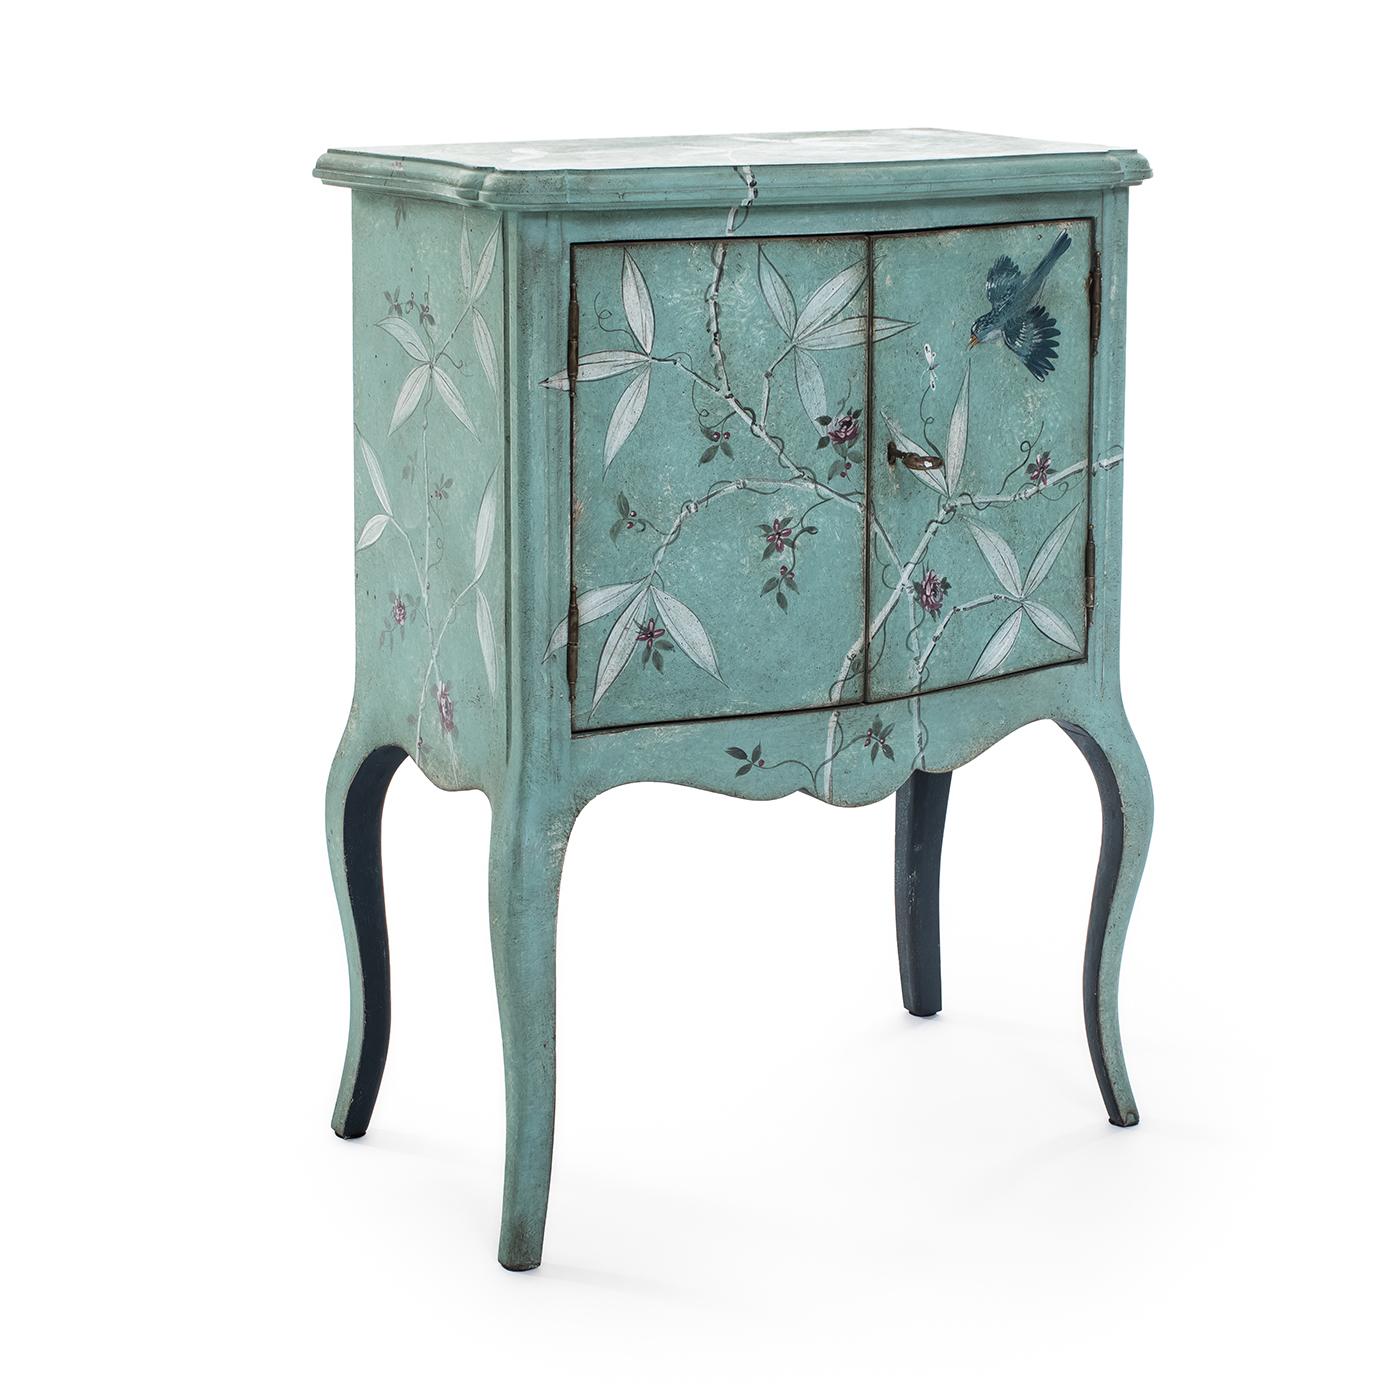 The custom made Tiepolo Nightstand is entirely hand crafted and beautifully decorated using Venetian style techniques. Stylish and charming in design, the colors and decorations can be applied according to the customer's requests in order to